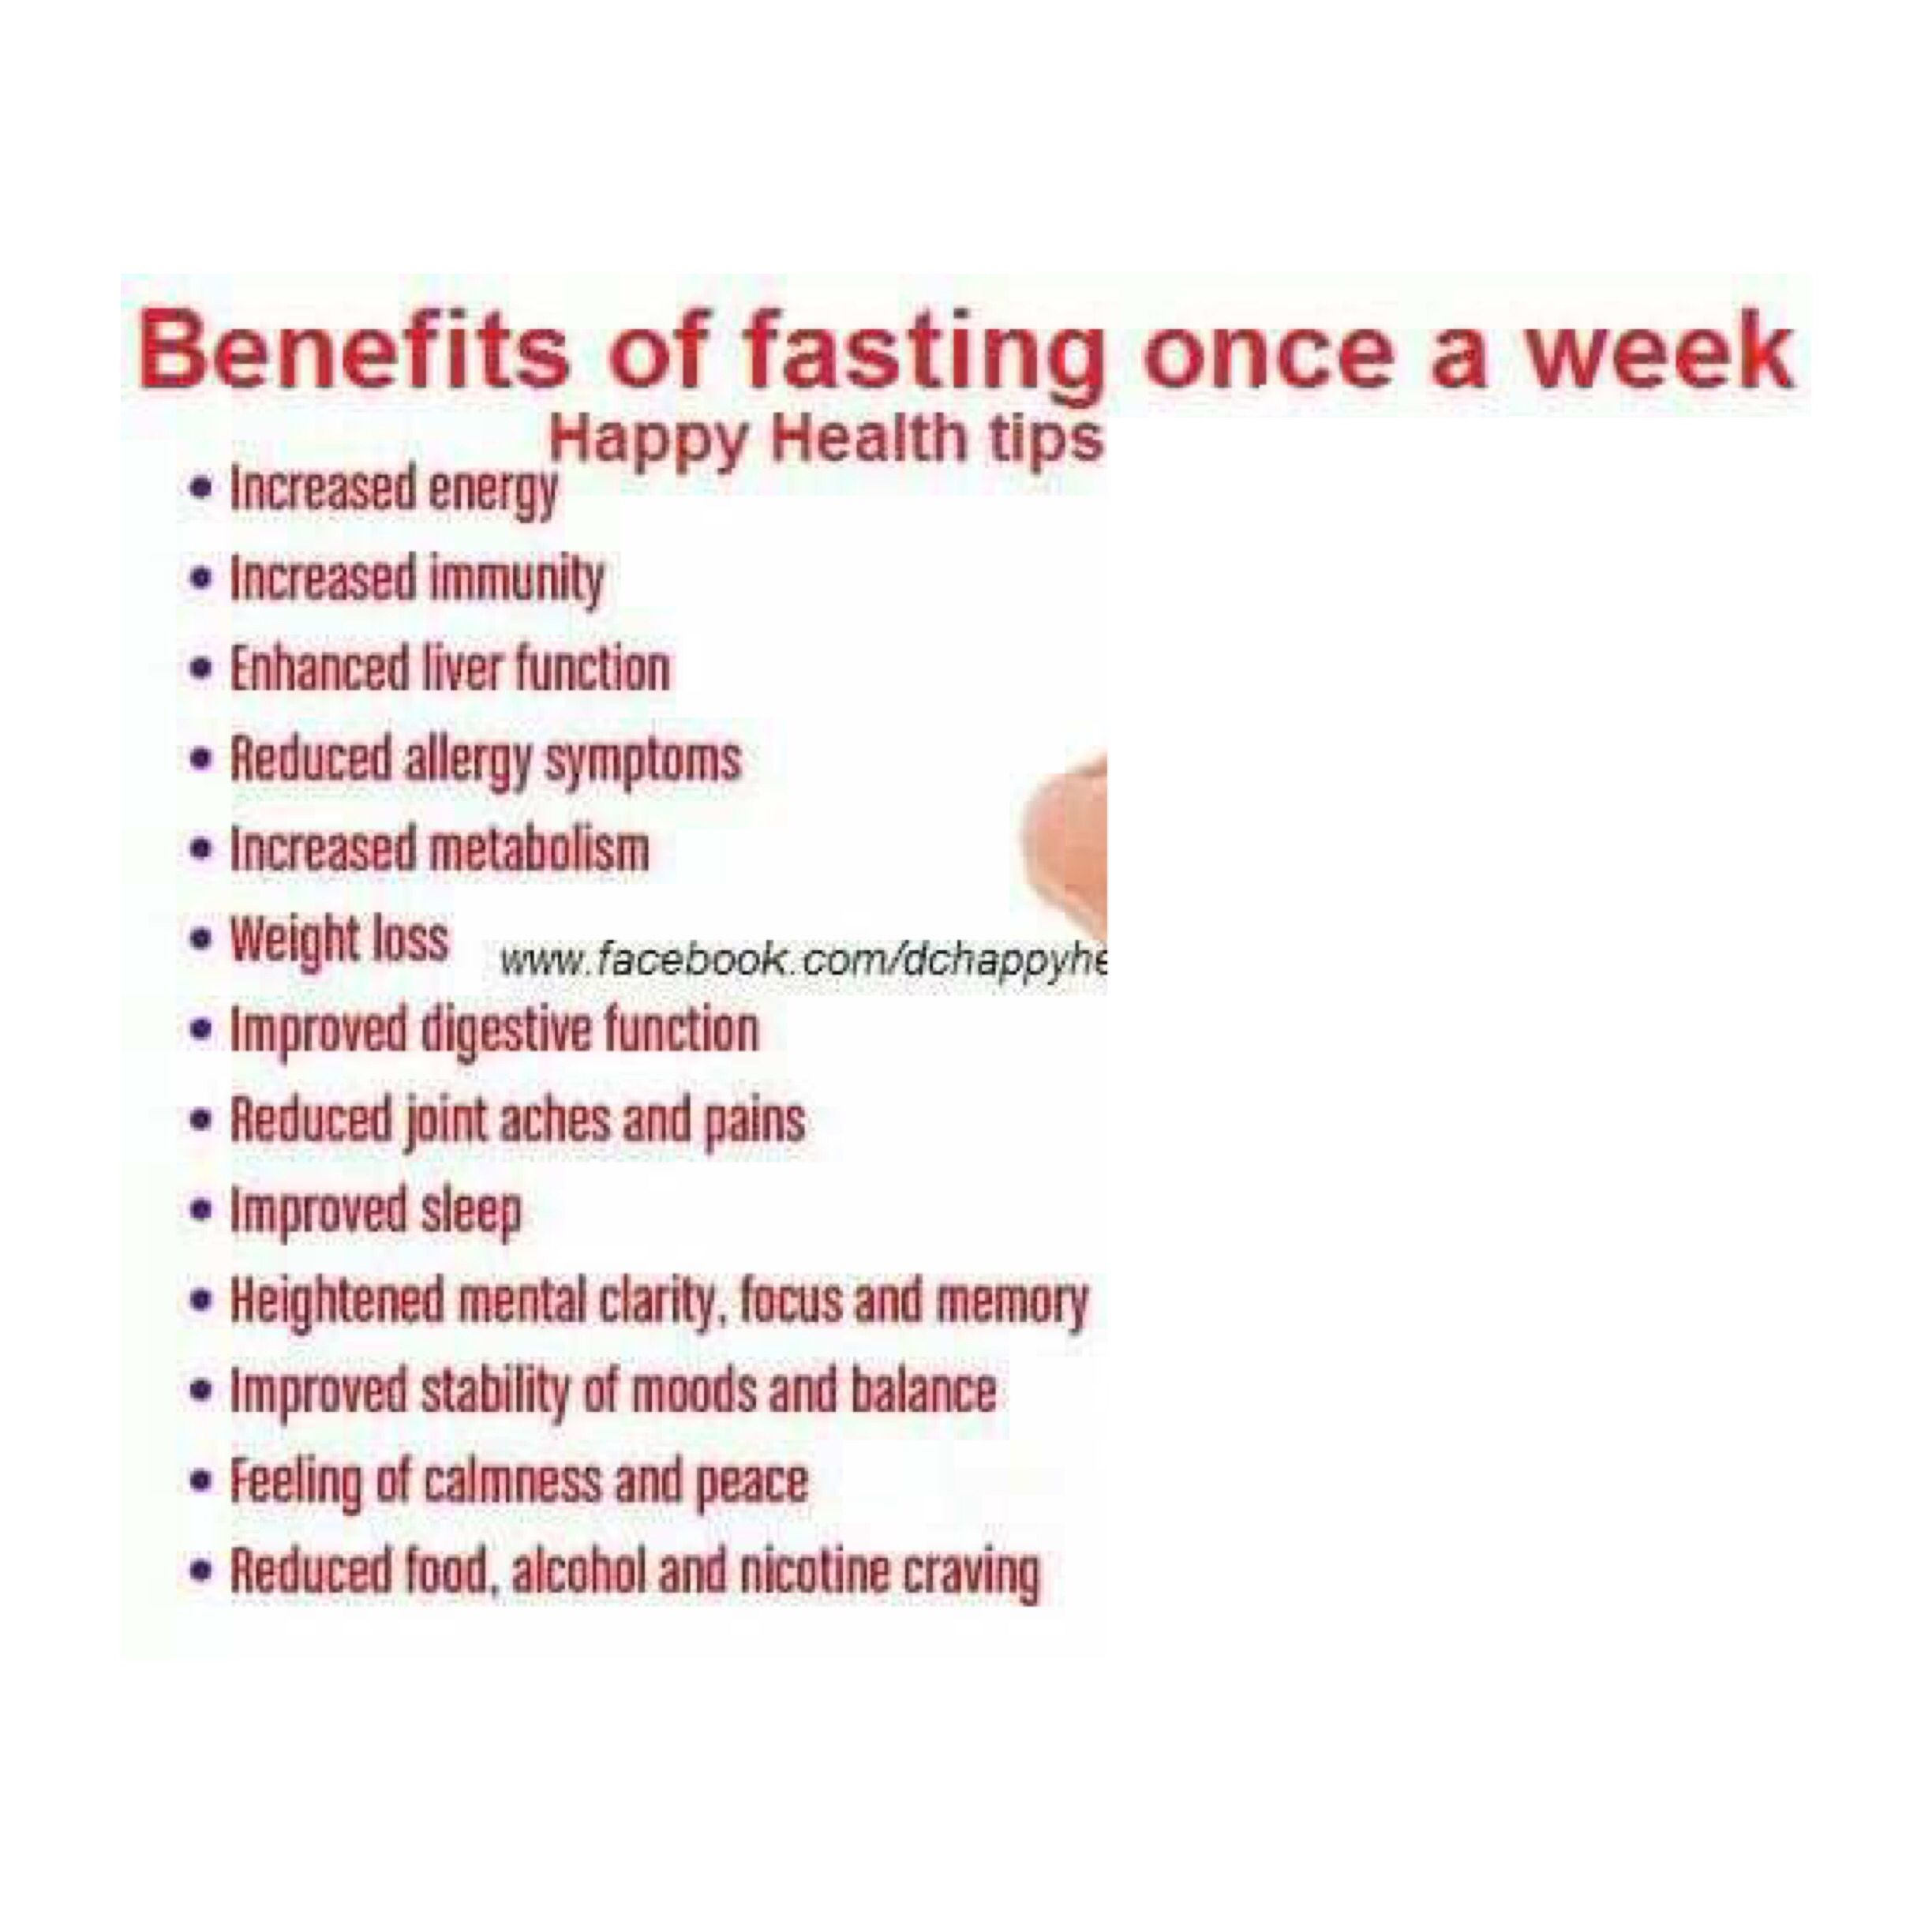 Physical benefits of fasting.